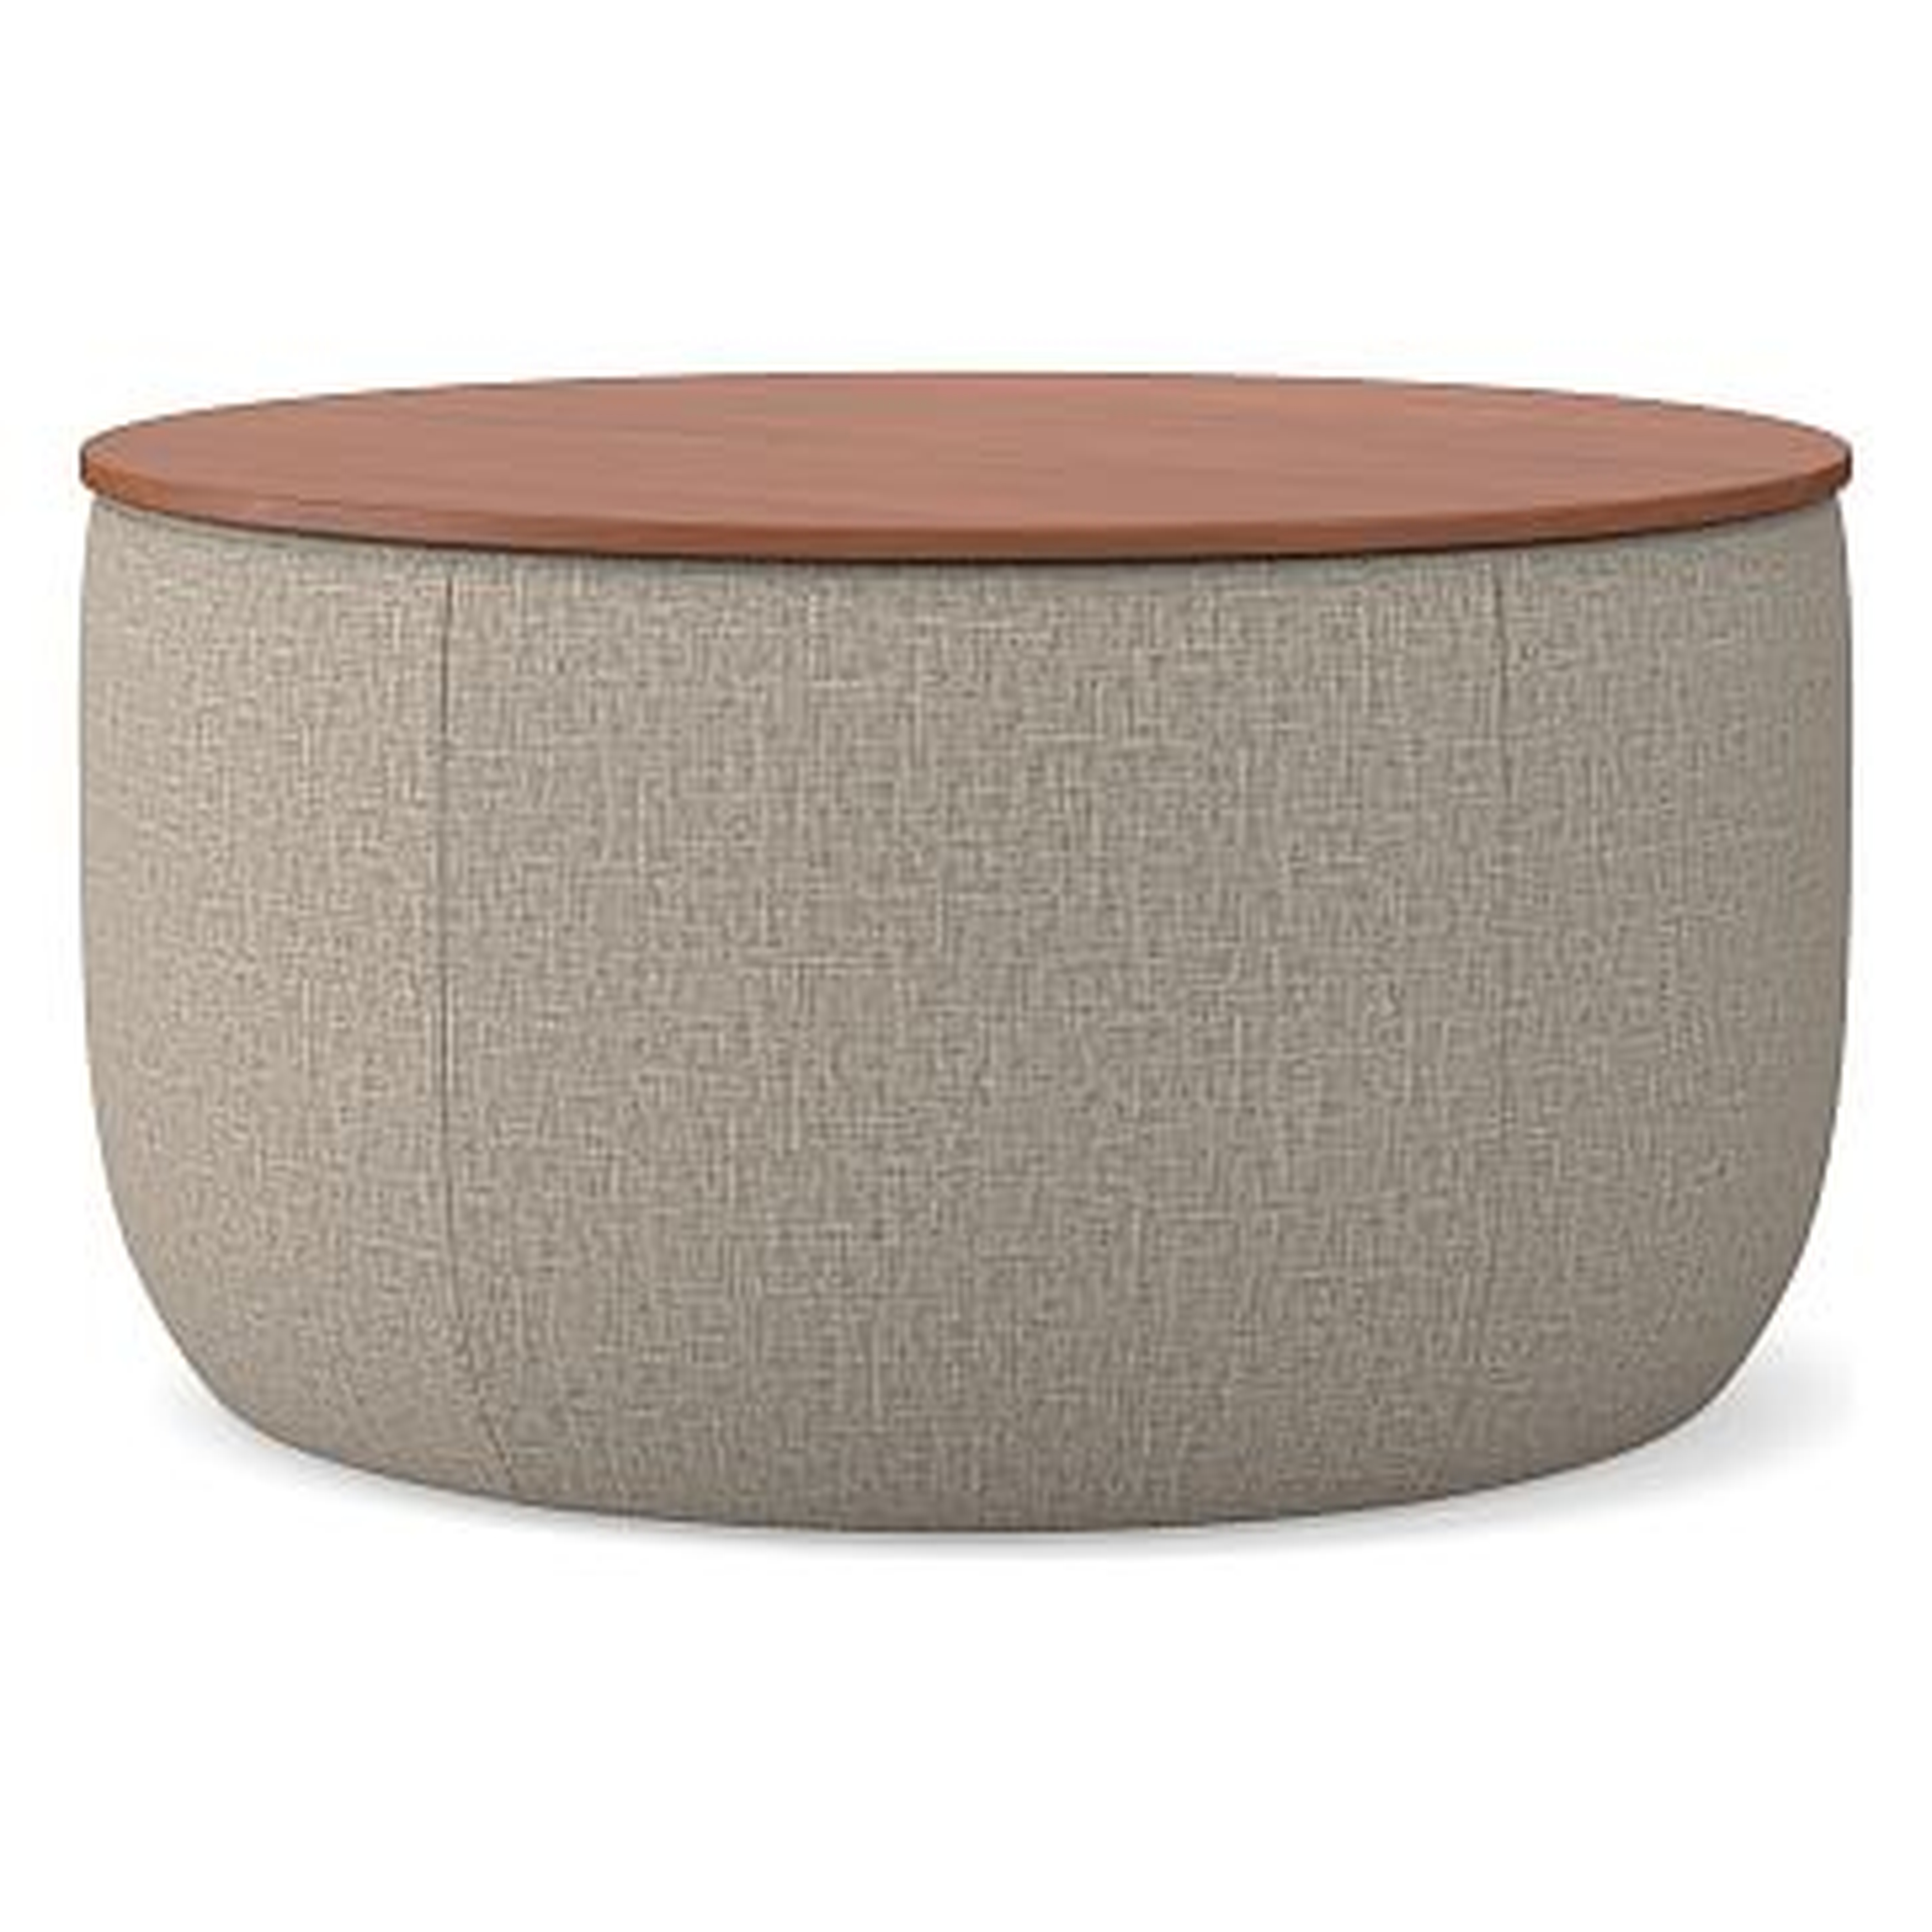 Upholstered Storage Base Ottoman - Large, Poly, Deco Weave, Stone, Dark Mineral - West Elm